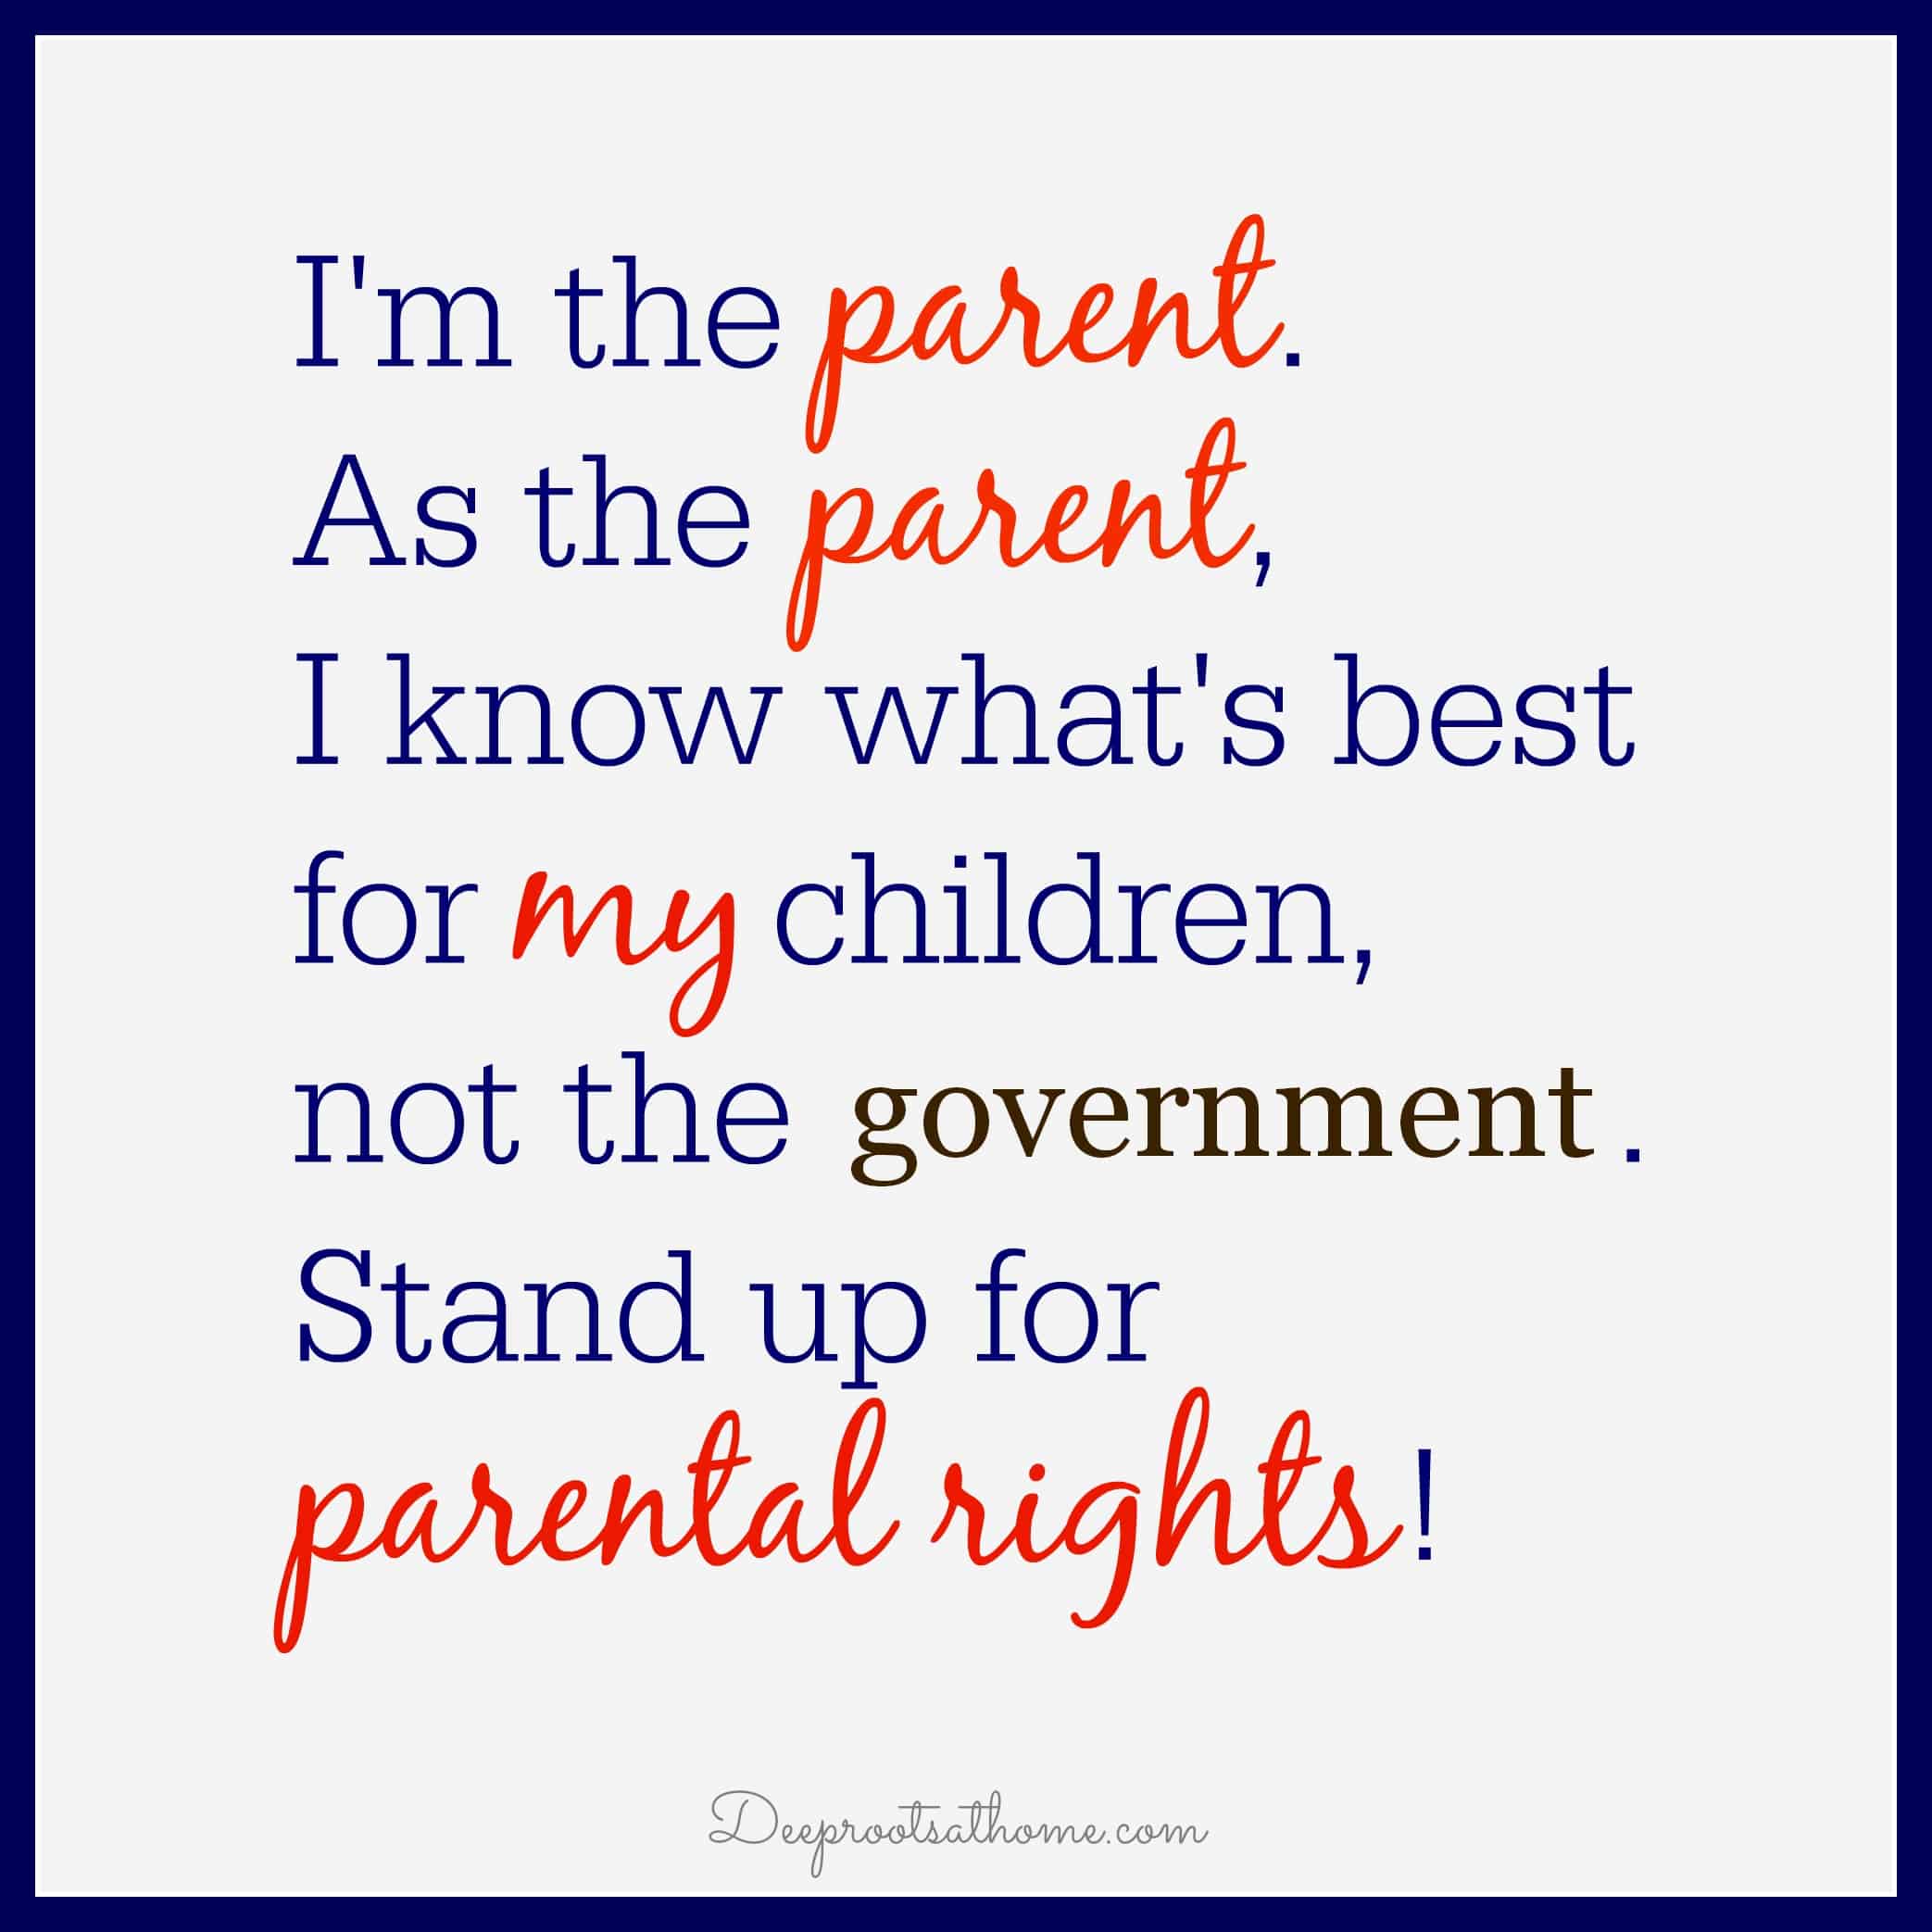 Stand up for parental rights quote.